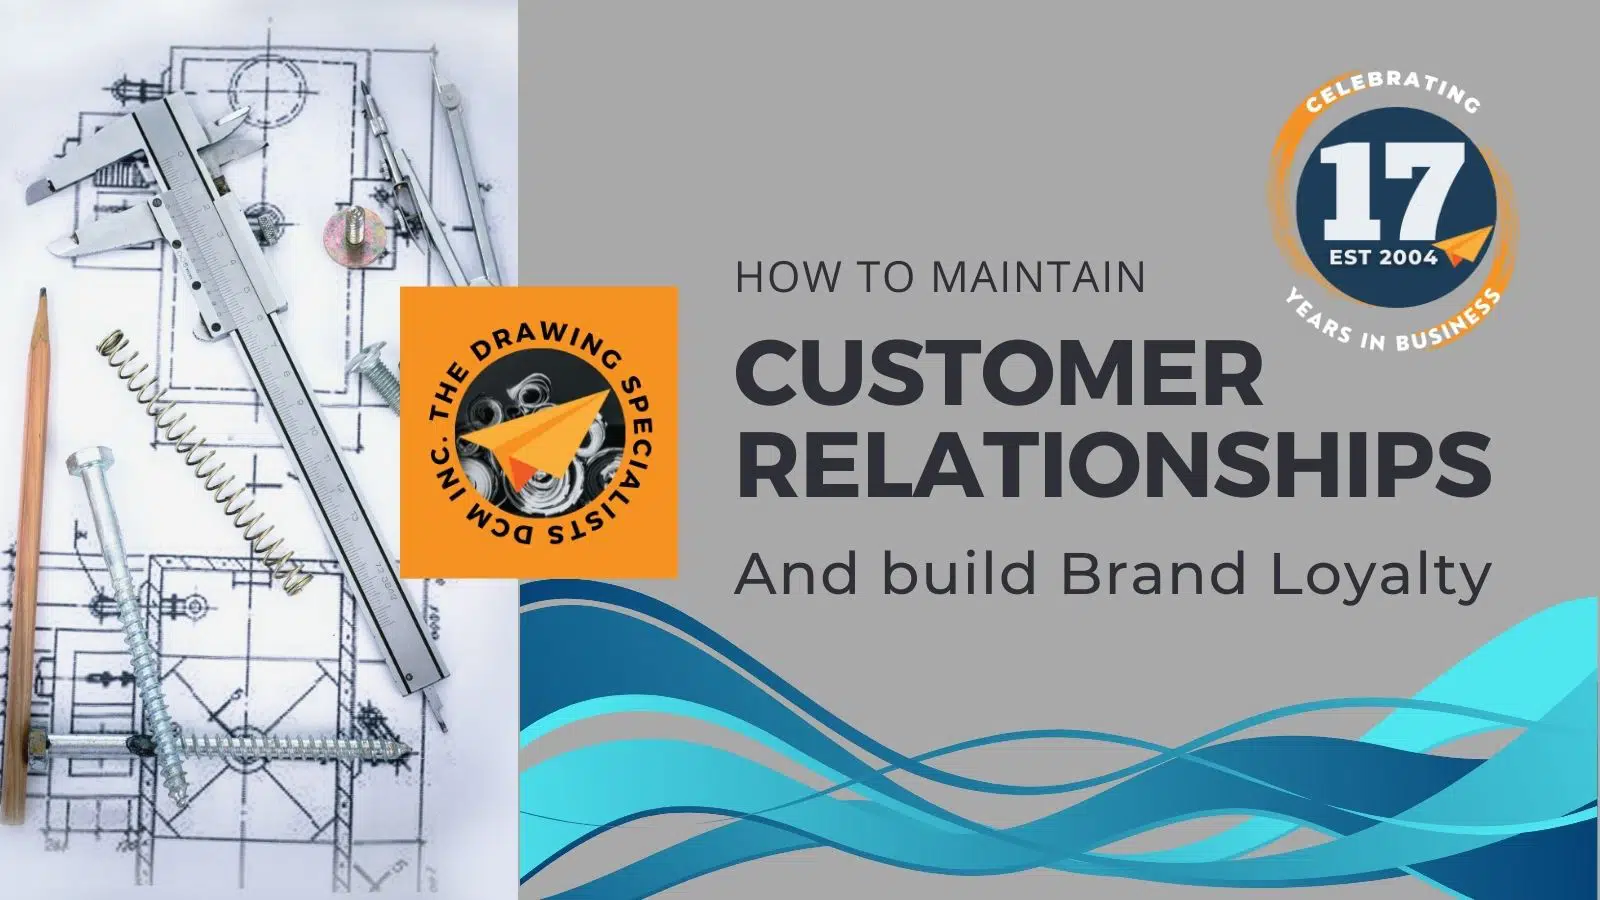 How to Maintain Customer Relationships and Build Brand Loyalty